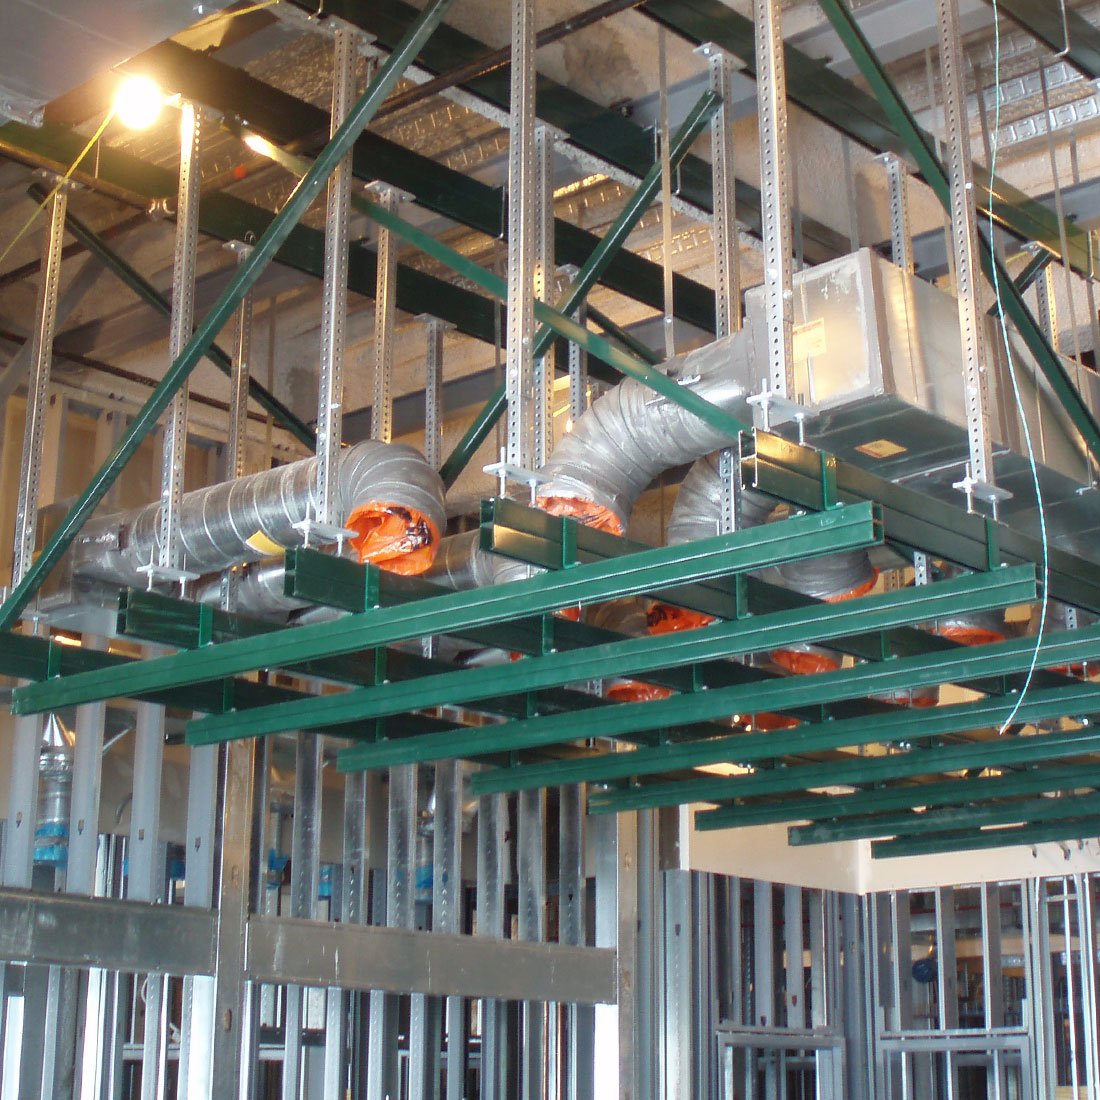 Unistrut Ceiling Grid installed in a local hospital in Buffalo, NY by Unistrut Construction | Unistrut Buffalo Supports